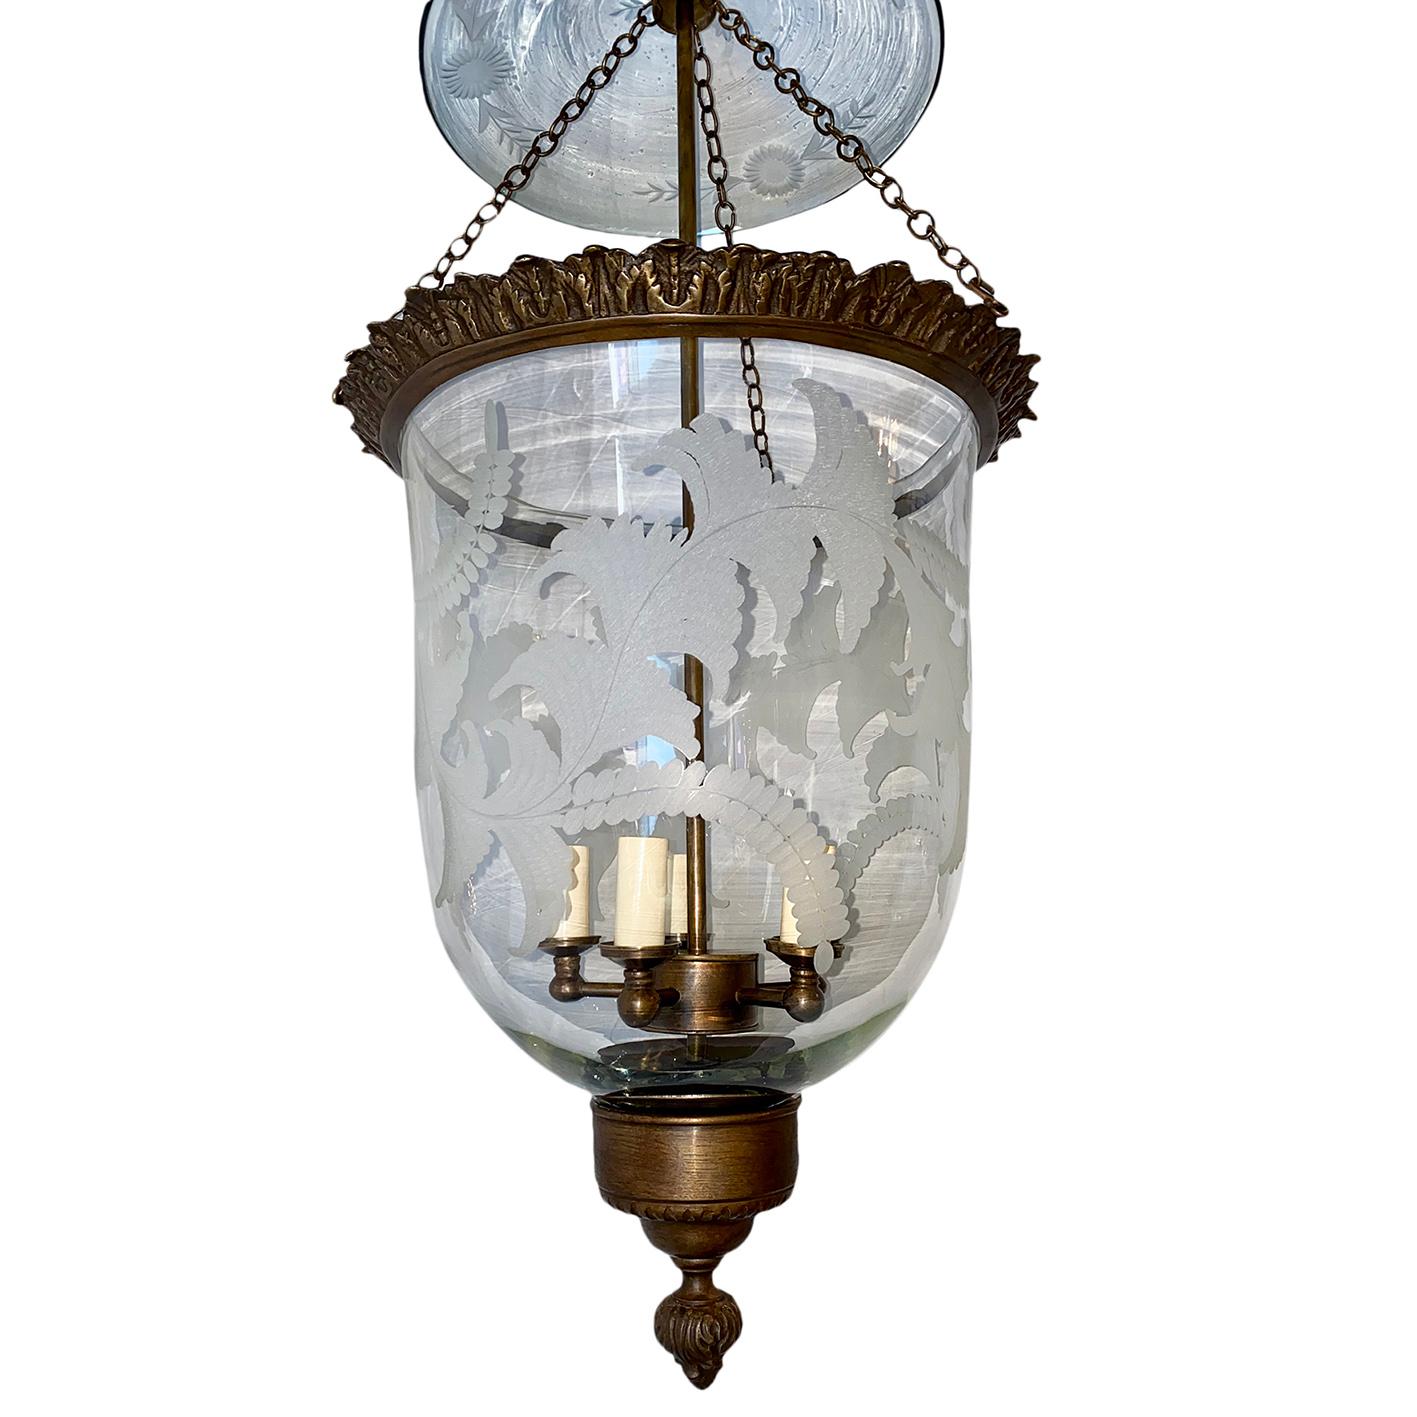 An antique circa 1920s English etched glass lantern with patinated bronze fittings and five interior candelabra lights.

Measurements:
Minimum drop 32